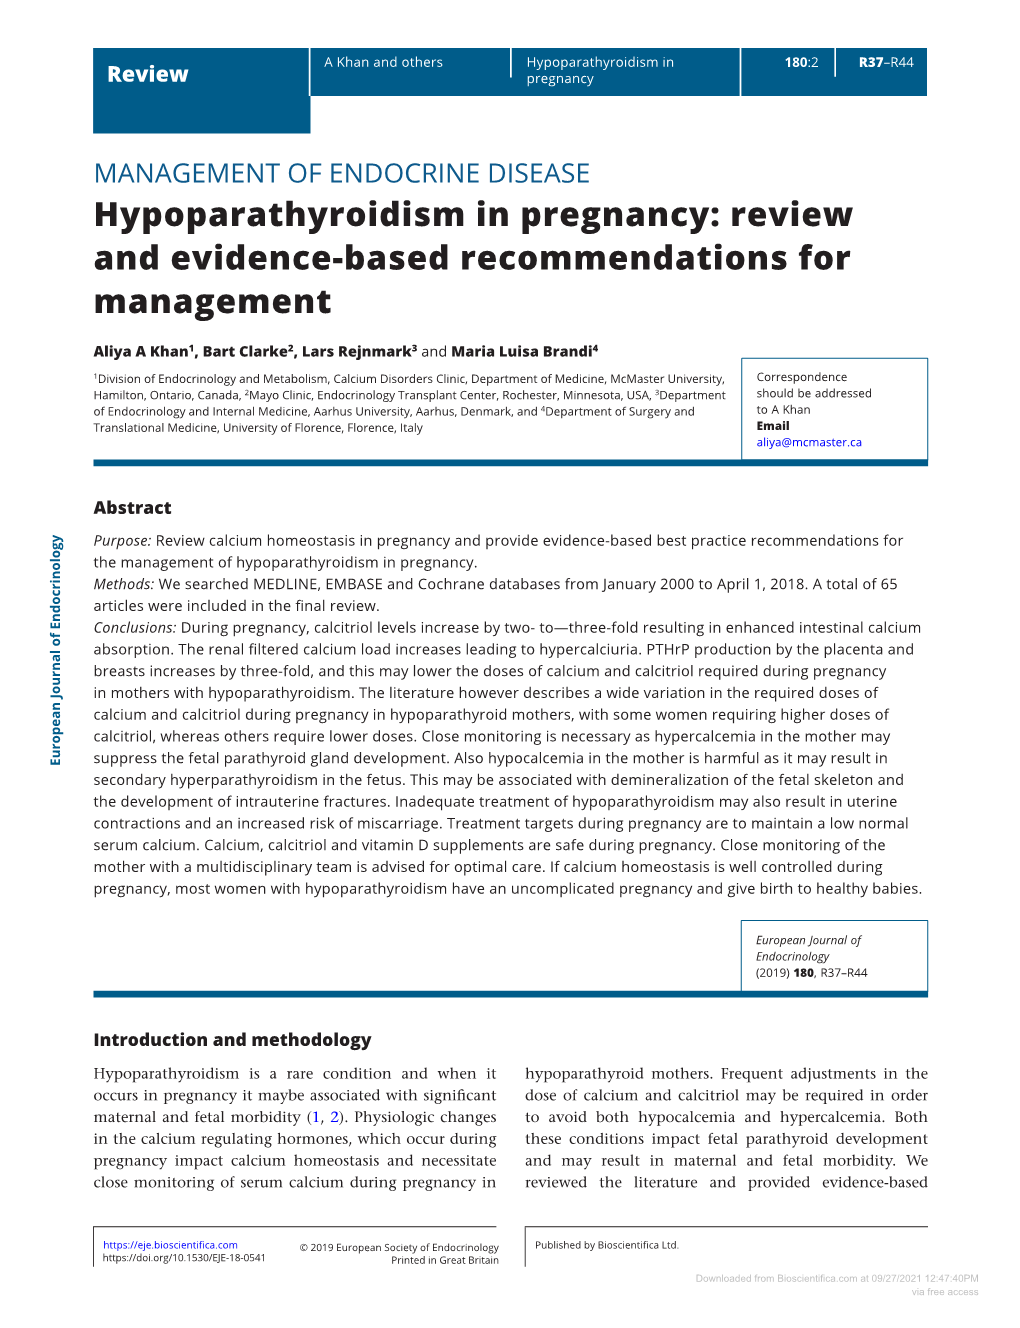 Hypoparathyroidism in Pregnancy: Review and Evidence-Based